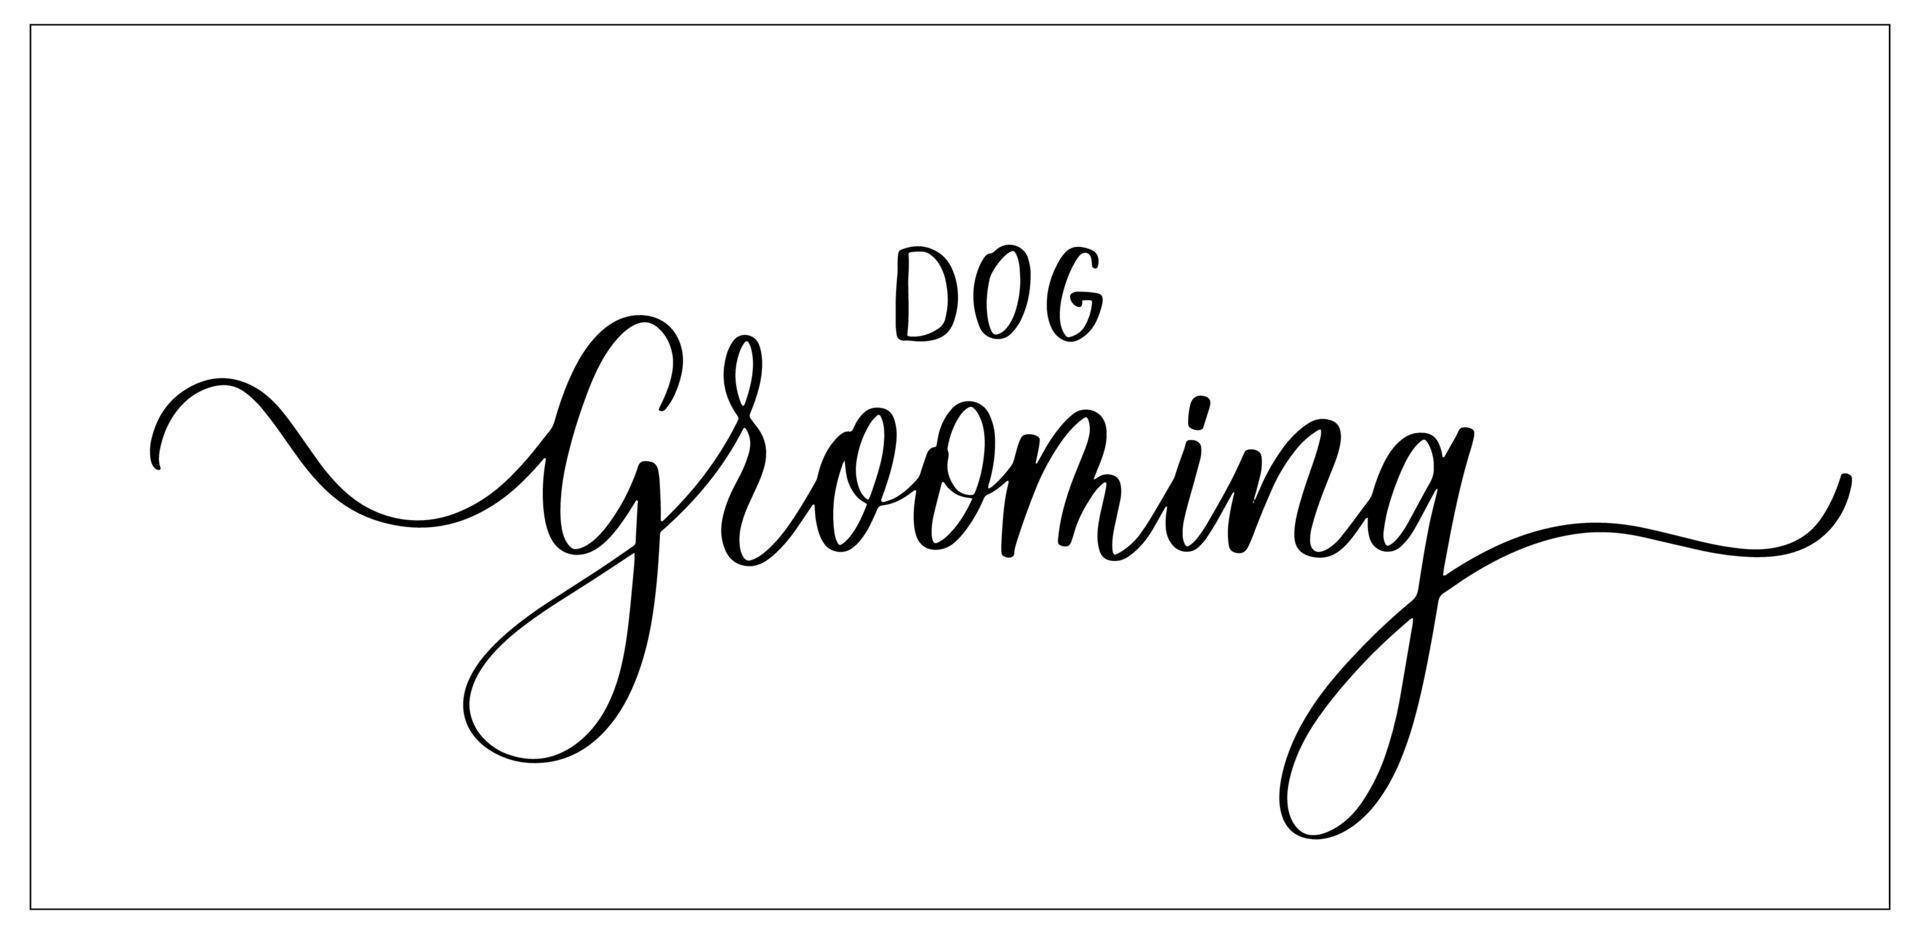 Dog grooming. Wavy elegant calligraphy spelling for decoration. vector